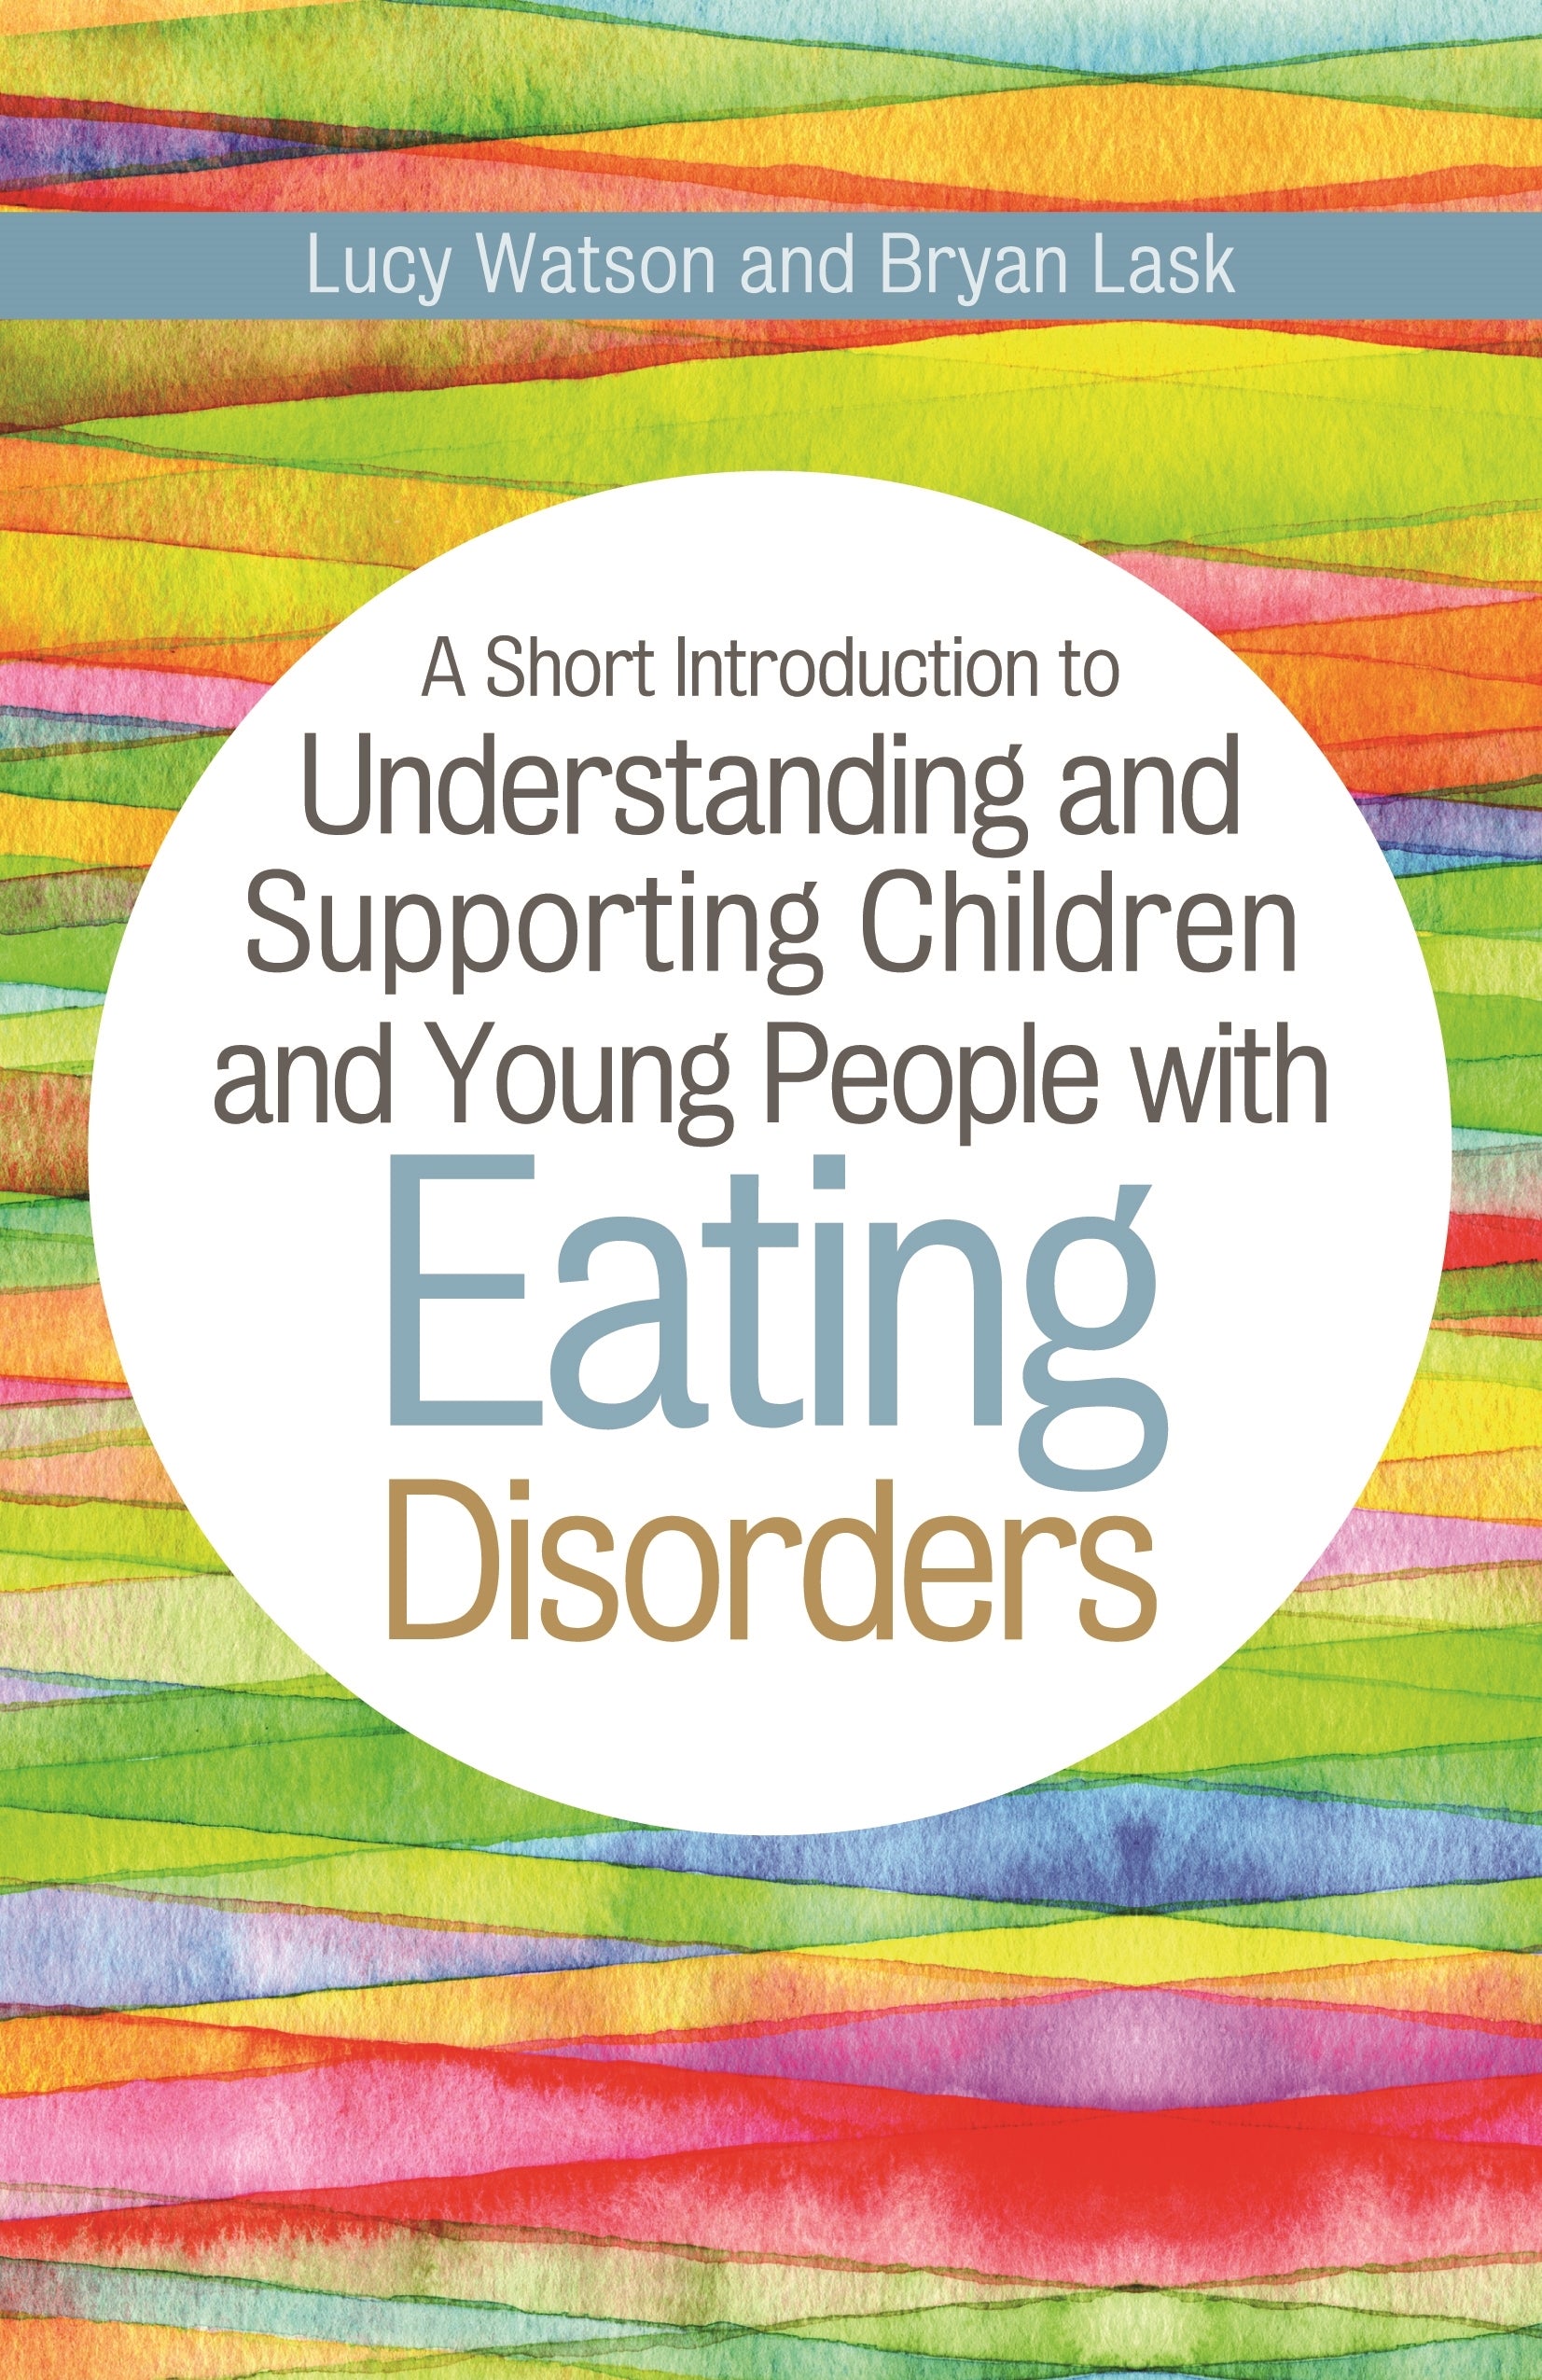 A Short Introduction to Understanding and Supporting Children and Young People with Eating Disorders by Bryan Lask, Lucy Watson